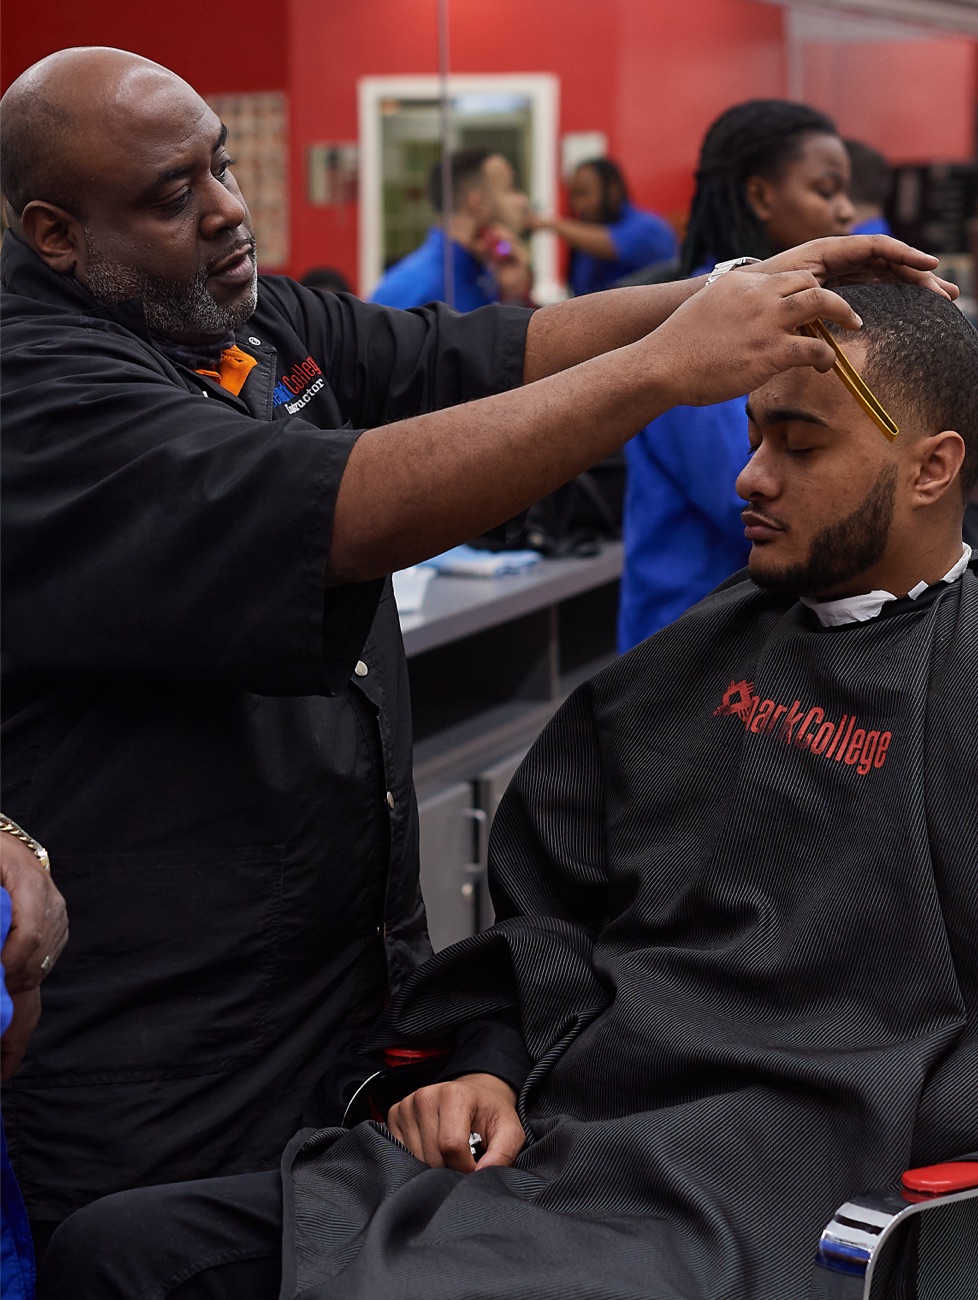 Learn how to enter the world of barbering from the industry experts at Denmark College in Merrillville, Indiana.